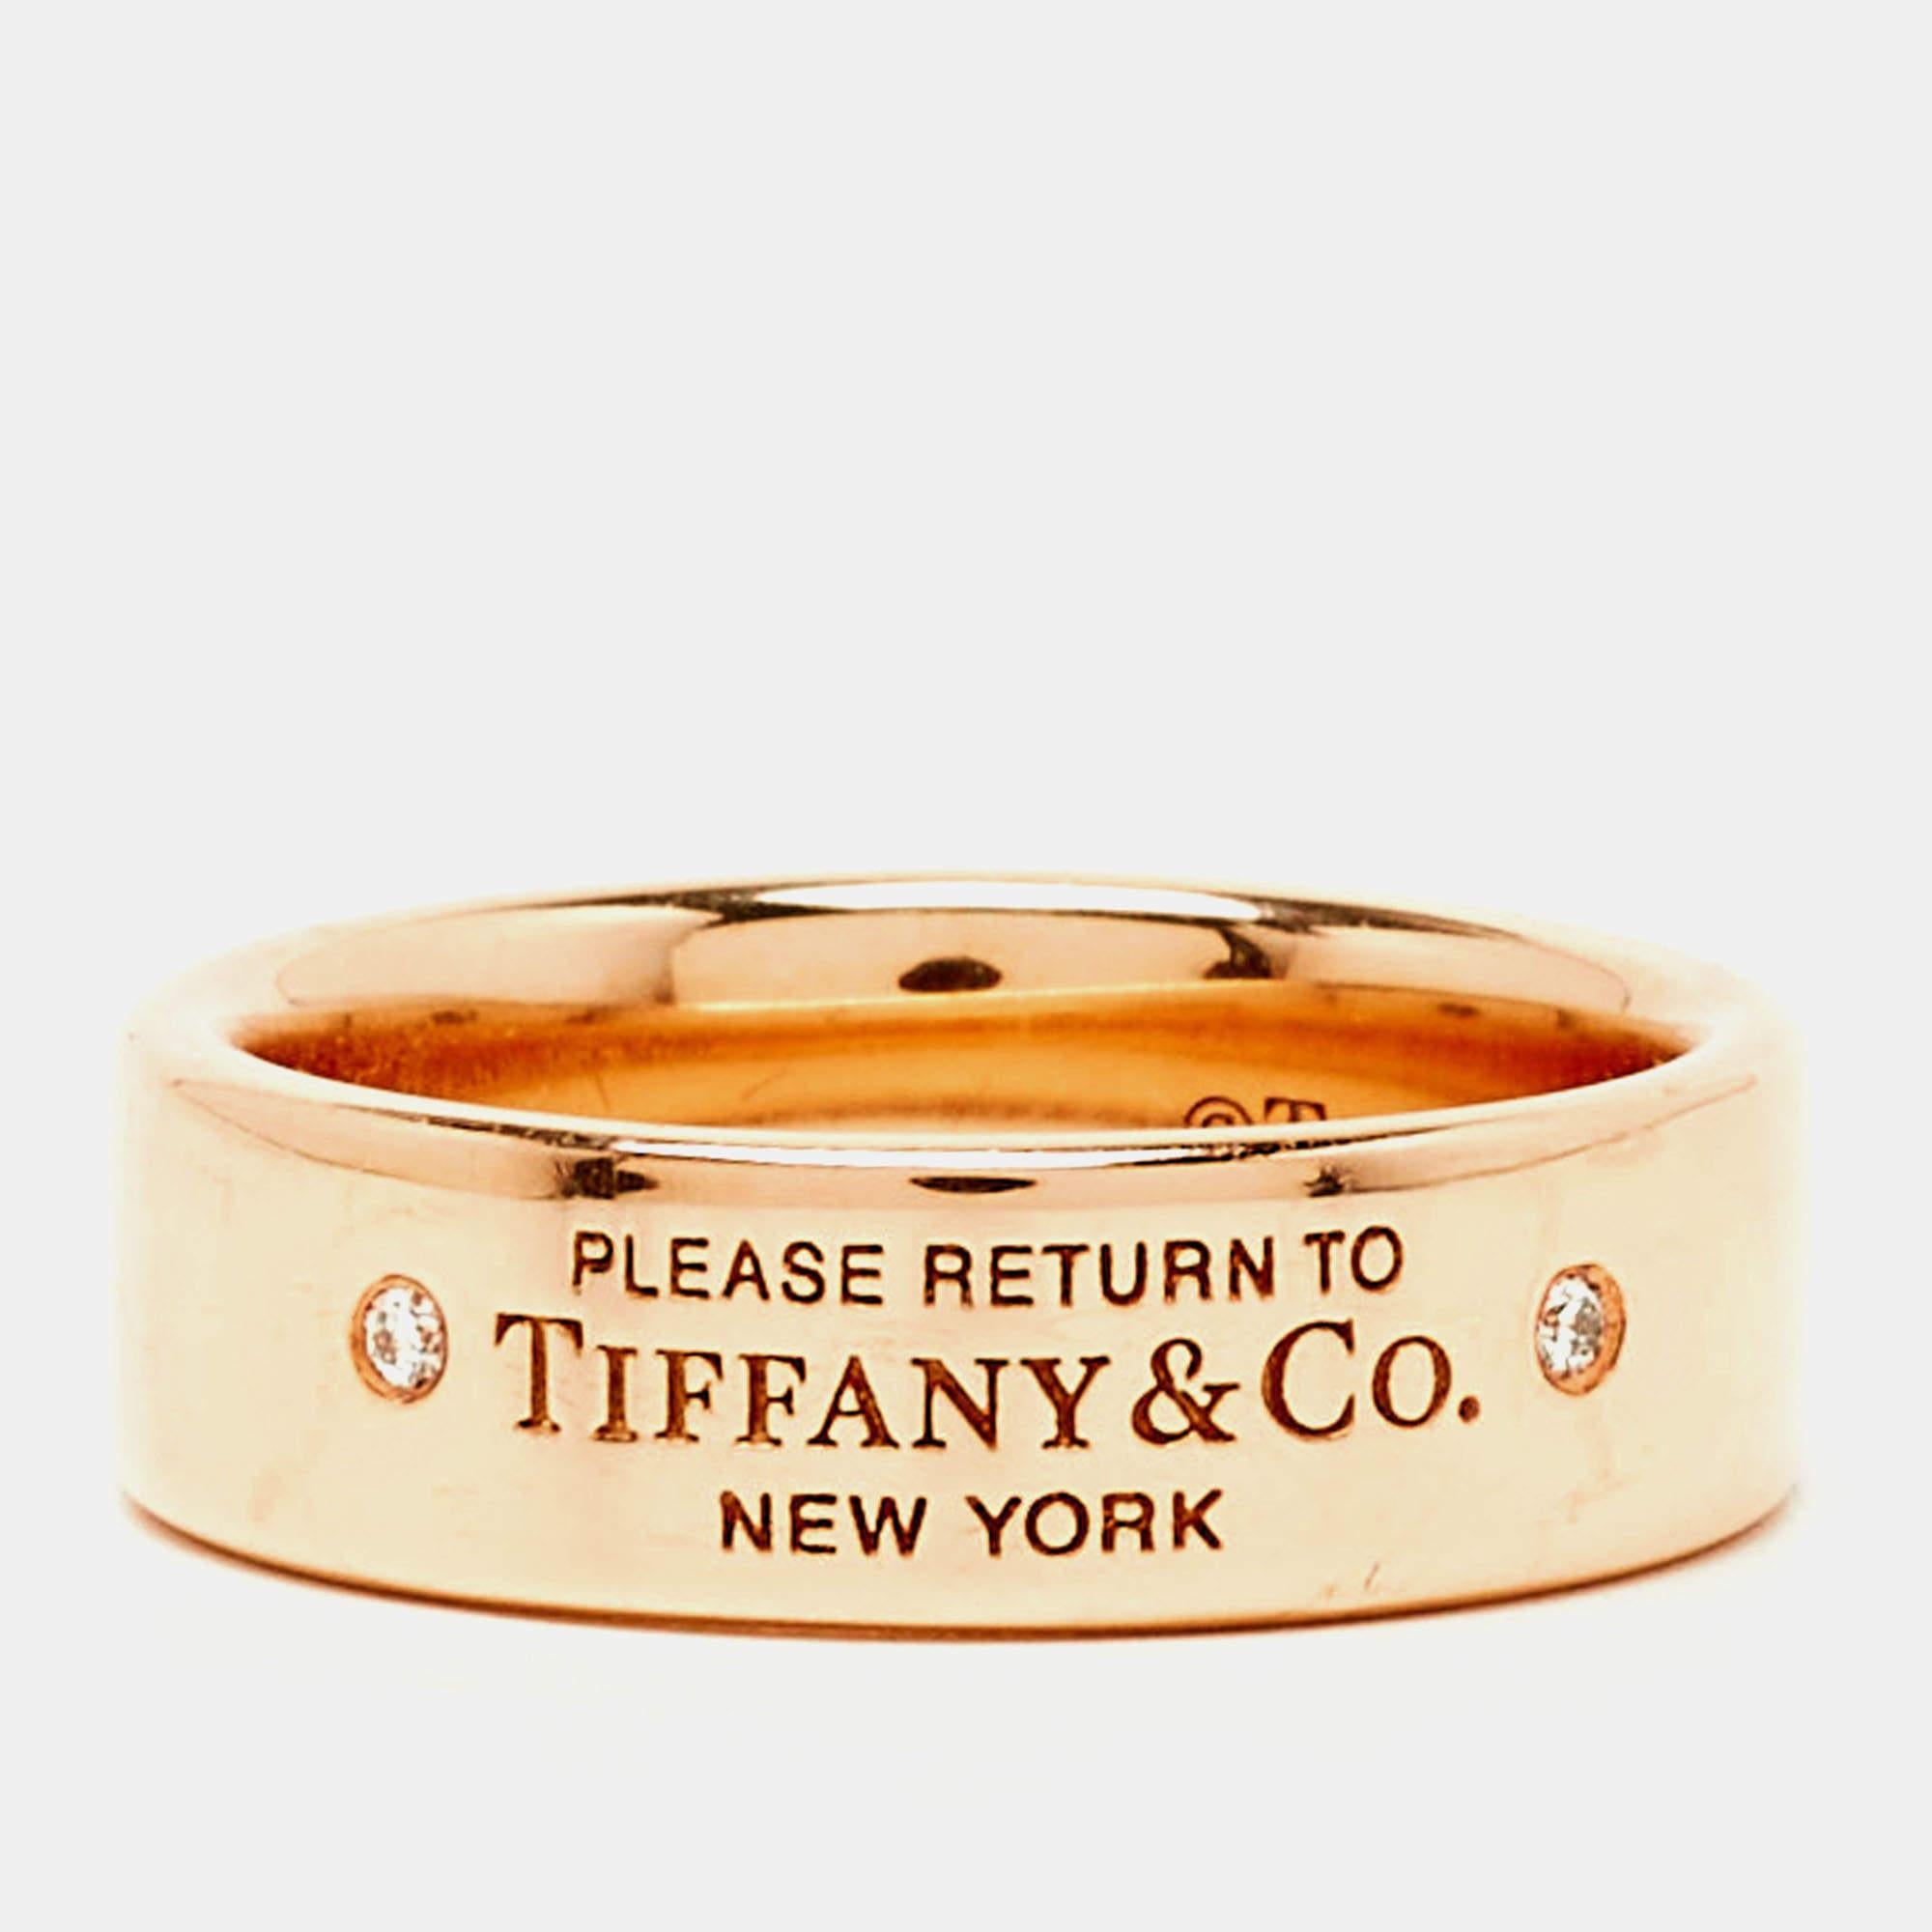 Tiffany & Co’s Return to Tiffany key ring from 1969 was inscribed with ‘Please Return to Tiffany & Co. New York,’ and a registration number so that if lost, the owner and key would be reunited at Tiffany’s flagship store. The Return to Tiffany